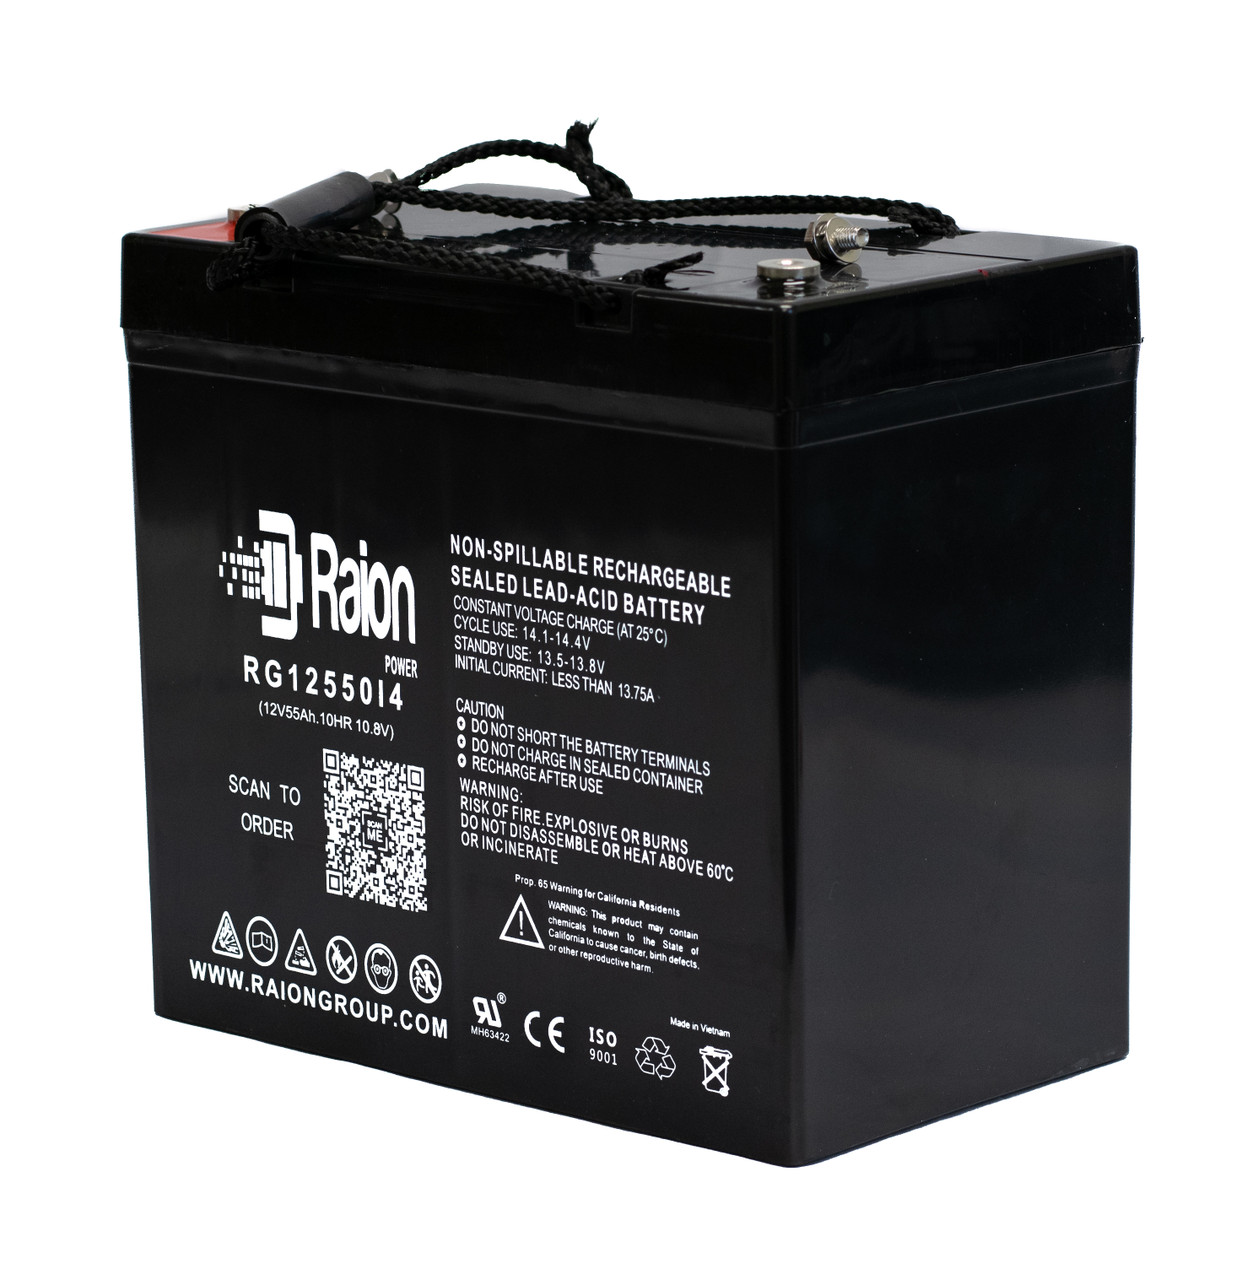 Raion Power 12V 55Ah 22NF Mobility Scooter Battery Replacement for Balder F290